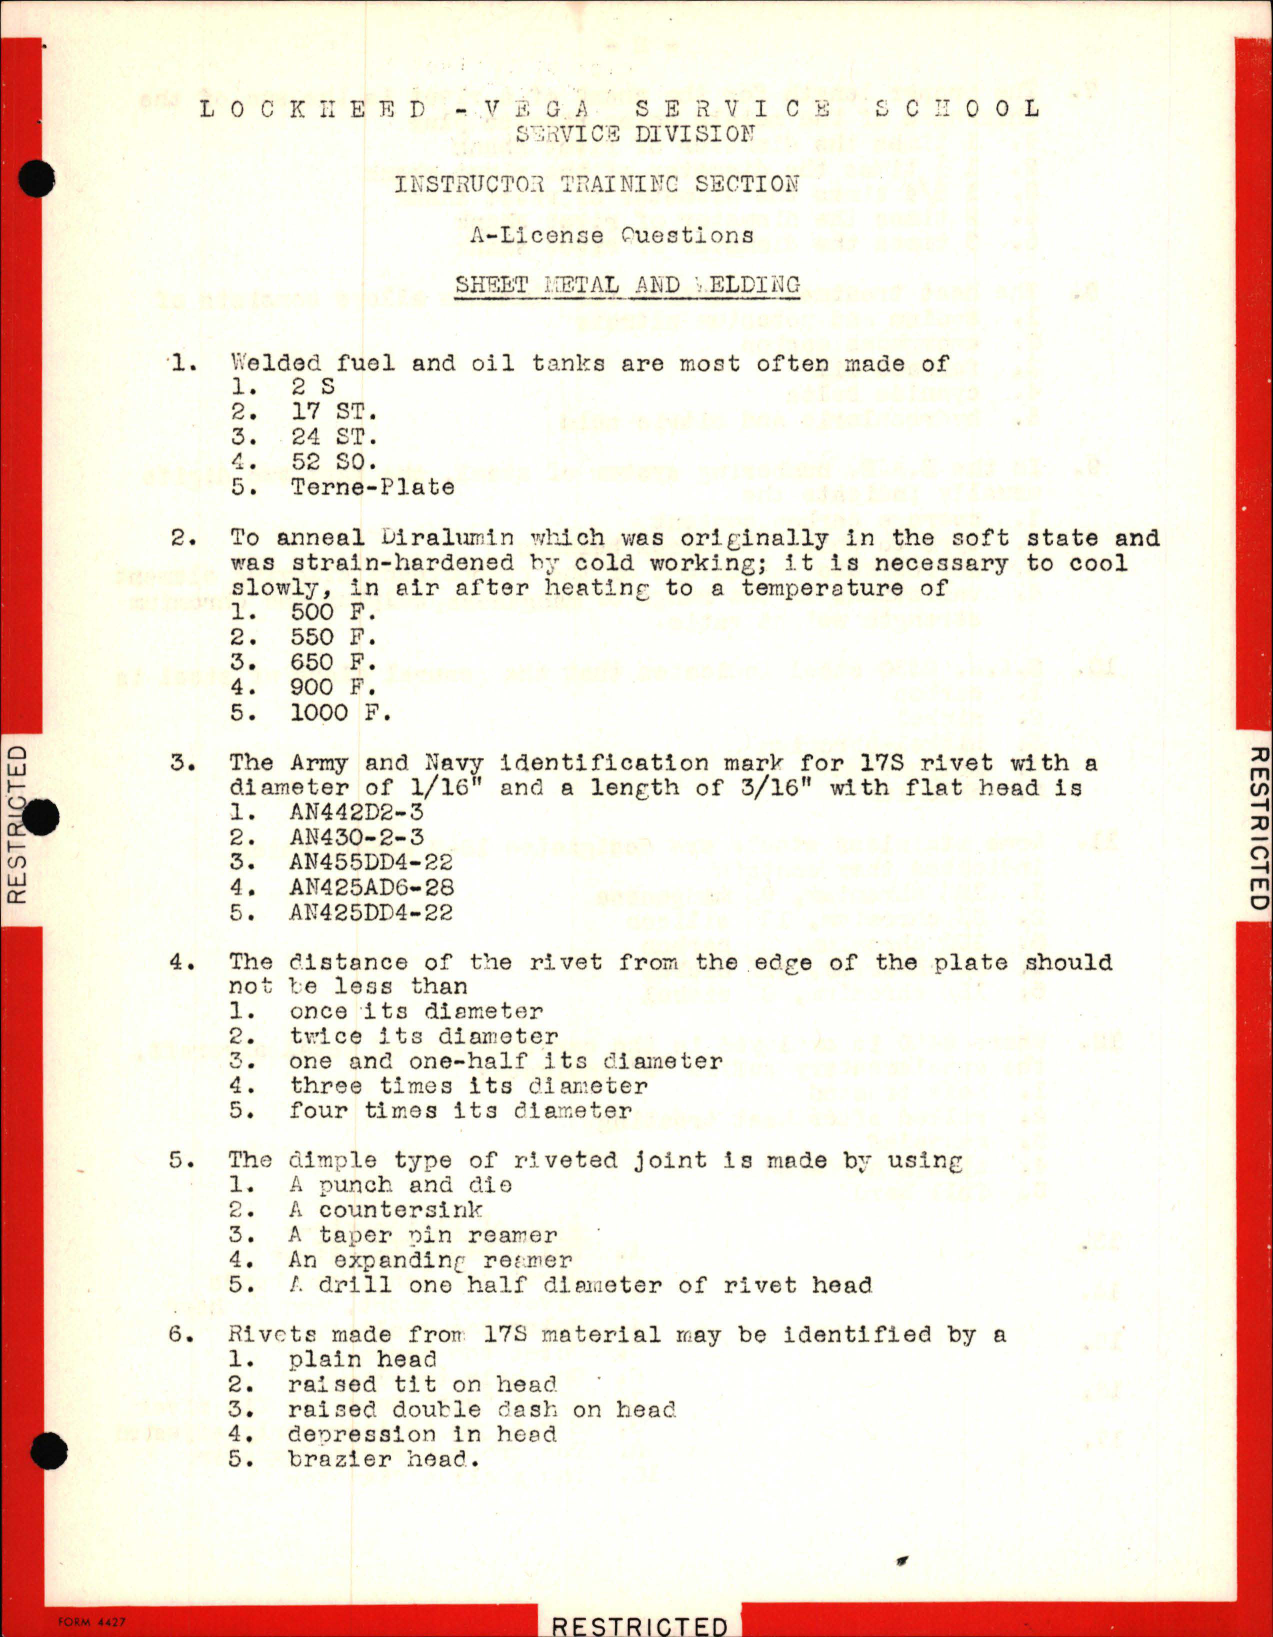 Sample page 1 from AirCorps Library document: Instructor Training Questions for Sheet Metal and Welding, Lockheed-Vega Service School